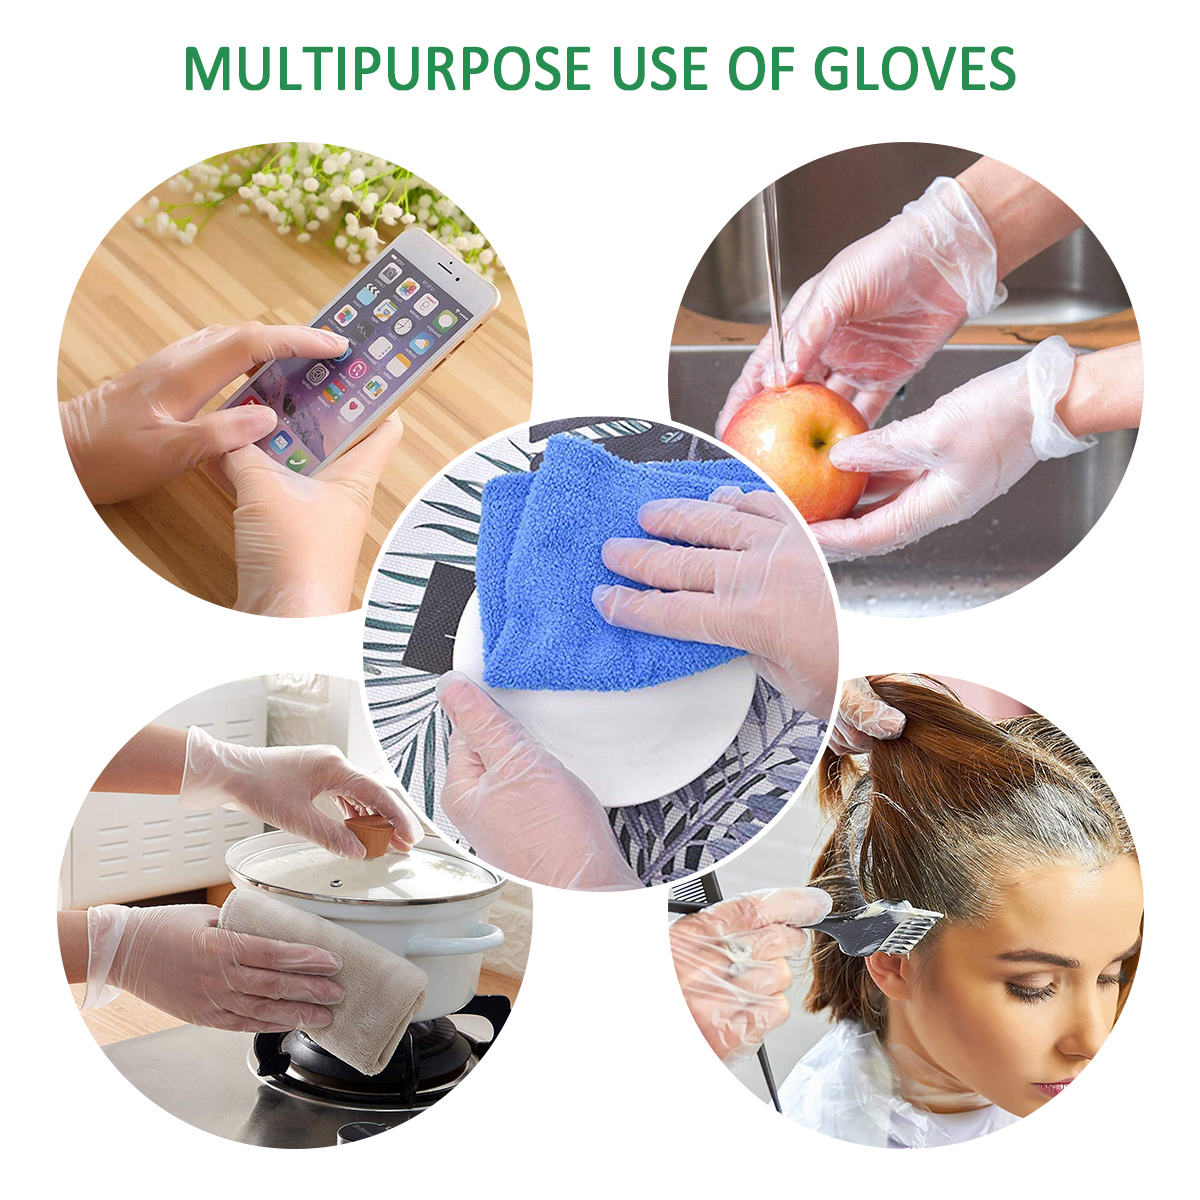 ZANLURE-100-Pcs-of-Nitrile-Disposable-Gloves-Work-GlovesPowder-Free-Textured-For-Foodstuff-Chemical--1660734-3